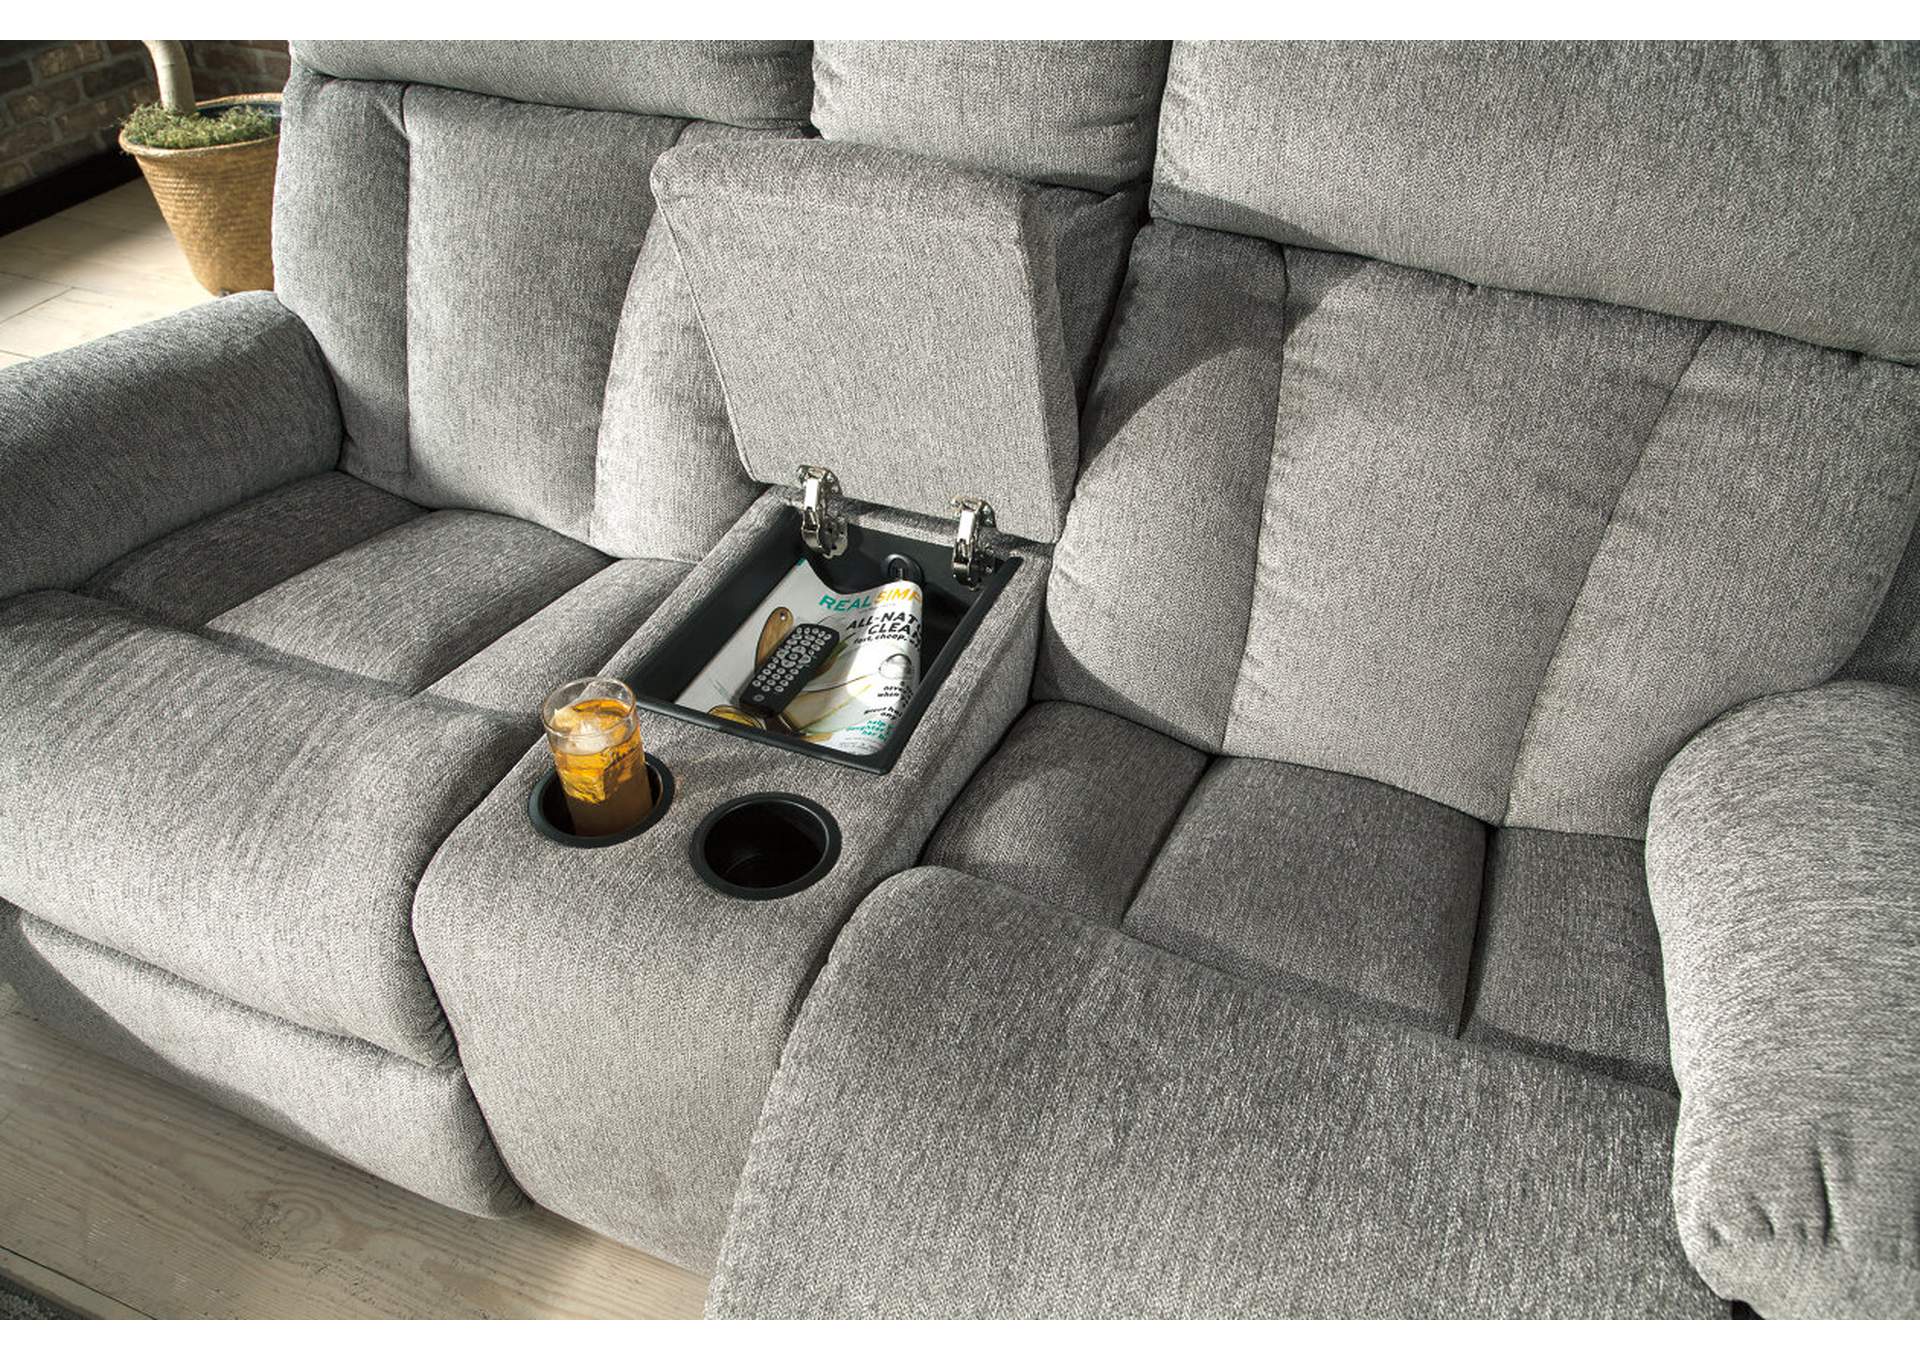 Mitchiner Sofa, Loveseat and Recliner,Signature Design By Ashley